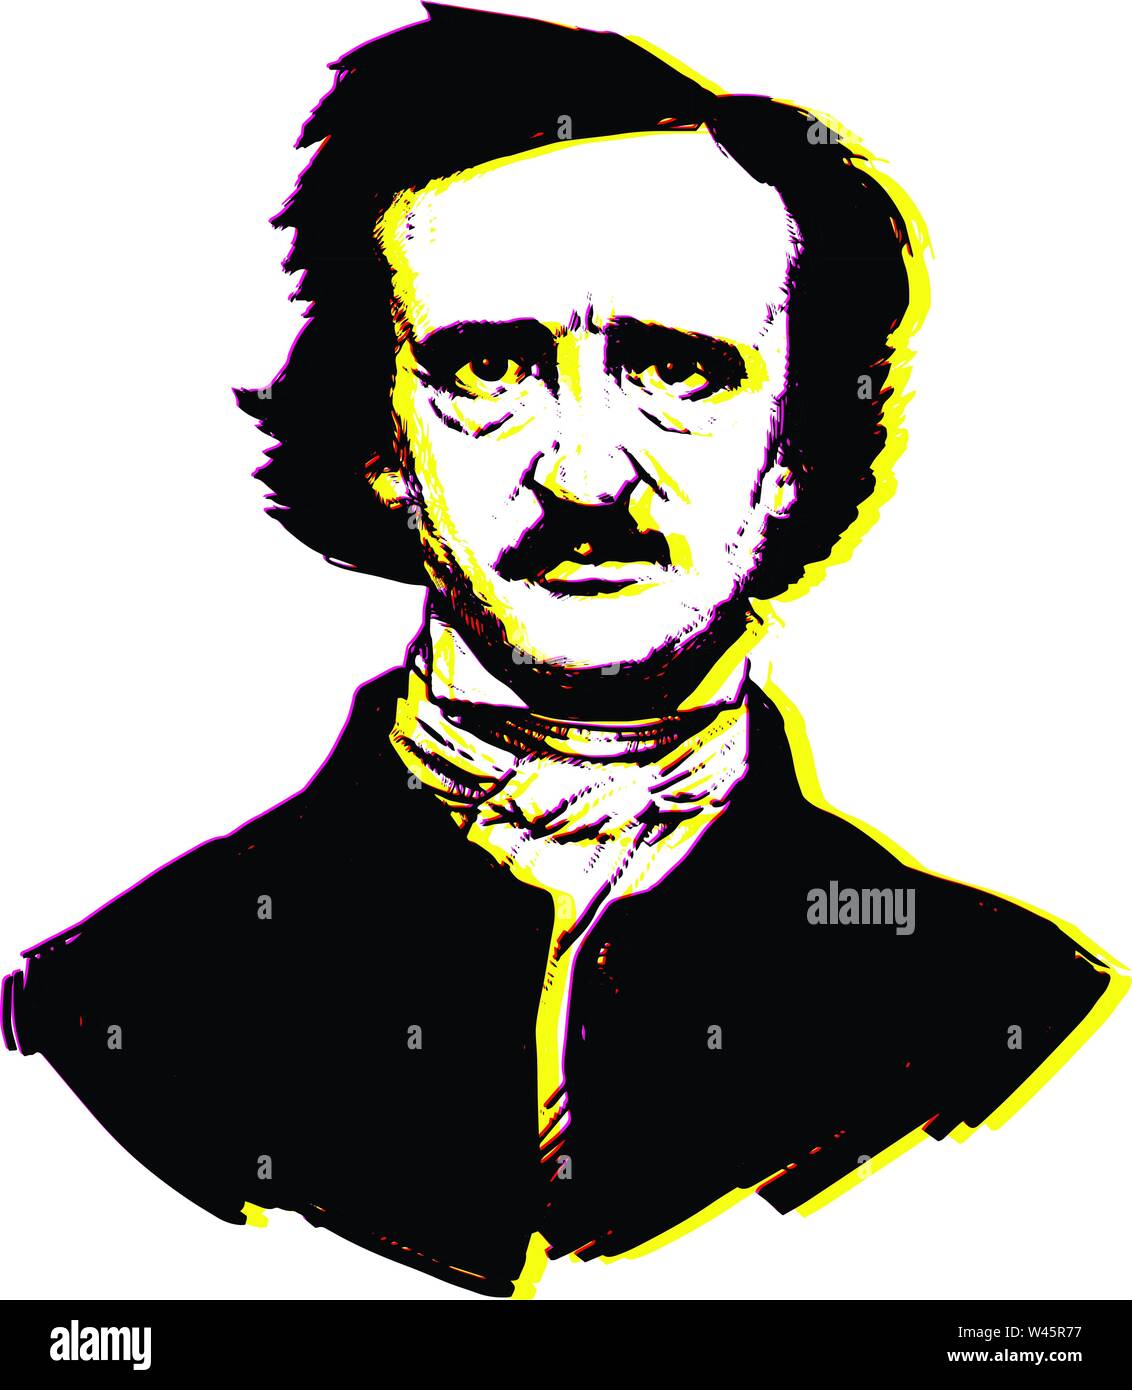 Illustration by Edgar Allan Poe. Portrait of a great American writer and poet. Illustration for a tattoo, site, booklet, poster, postcard. Image on wh Stock Vector